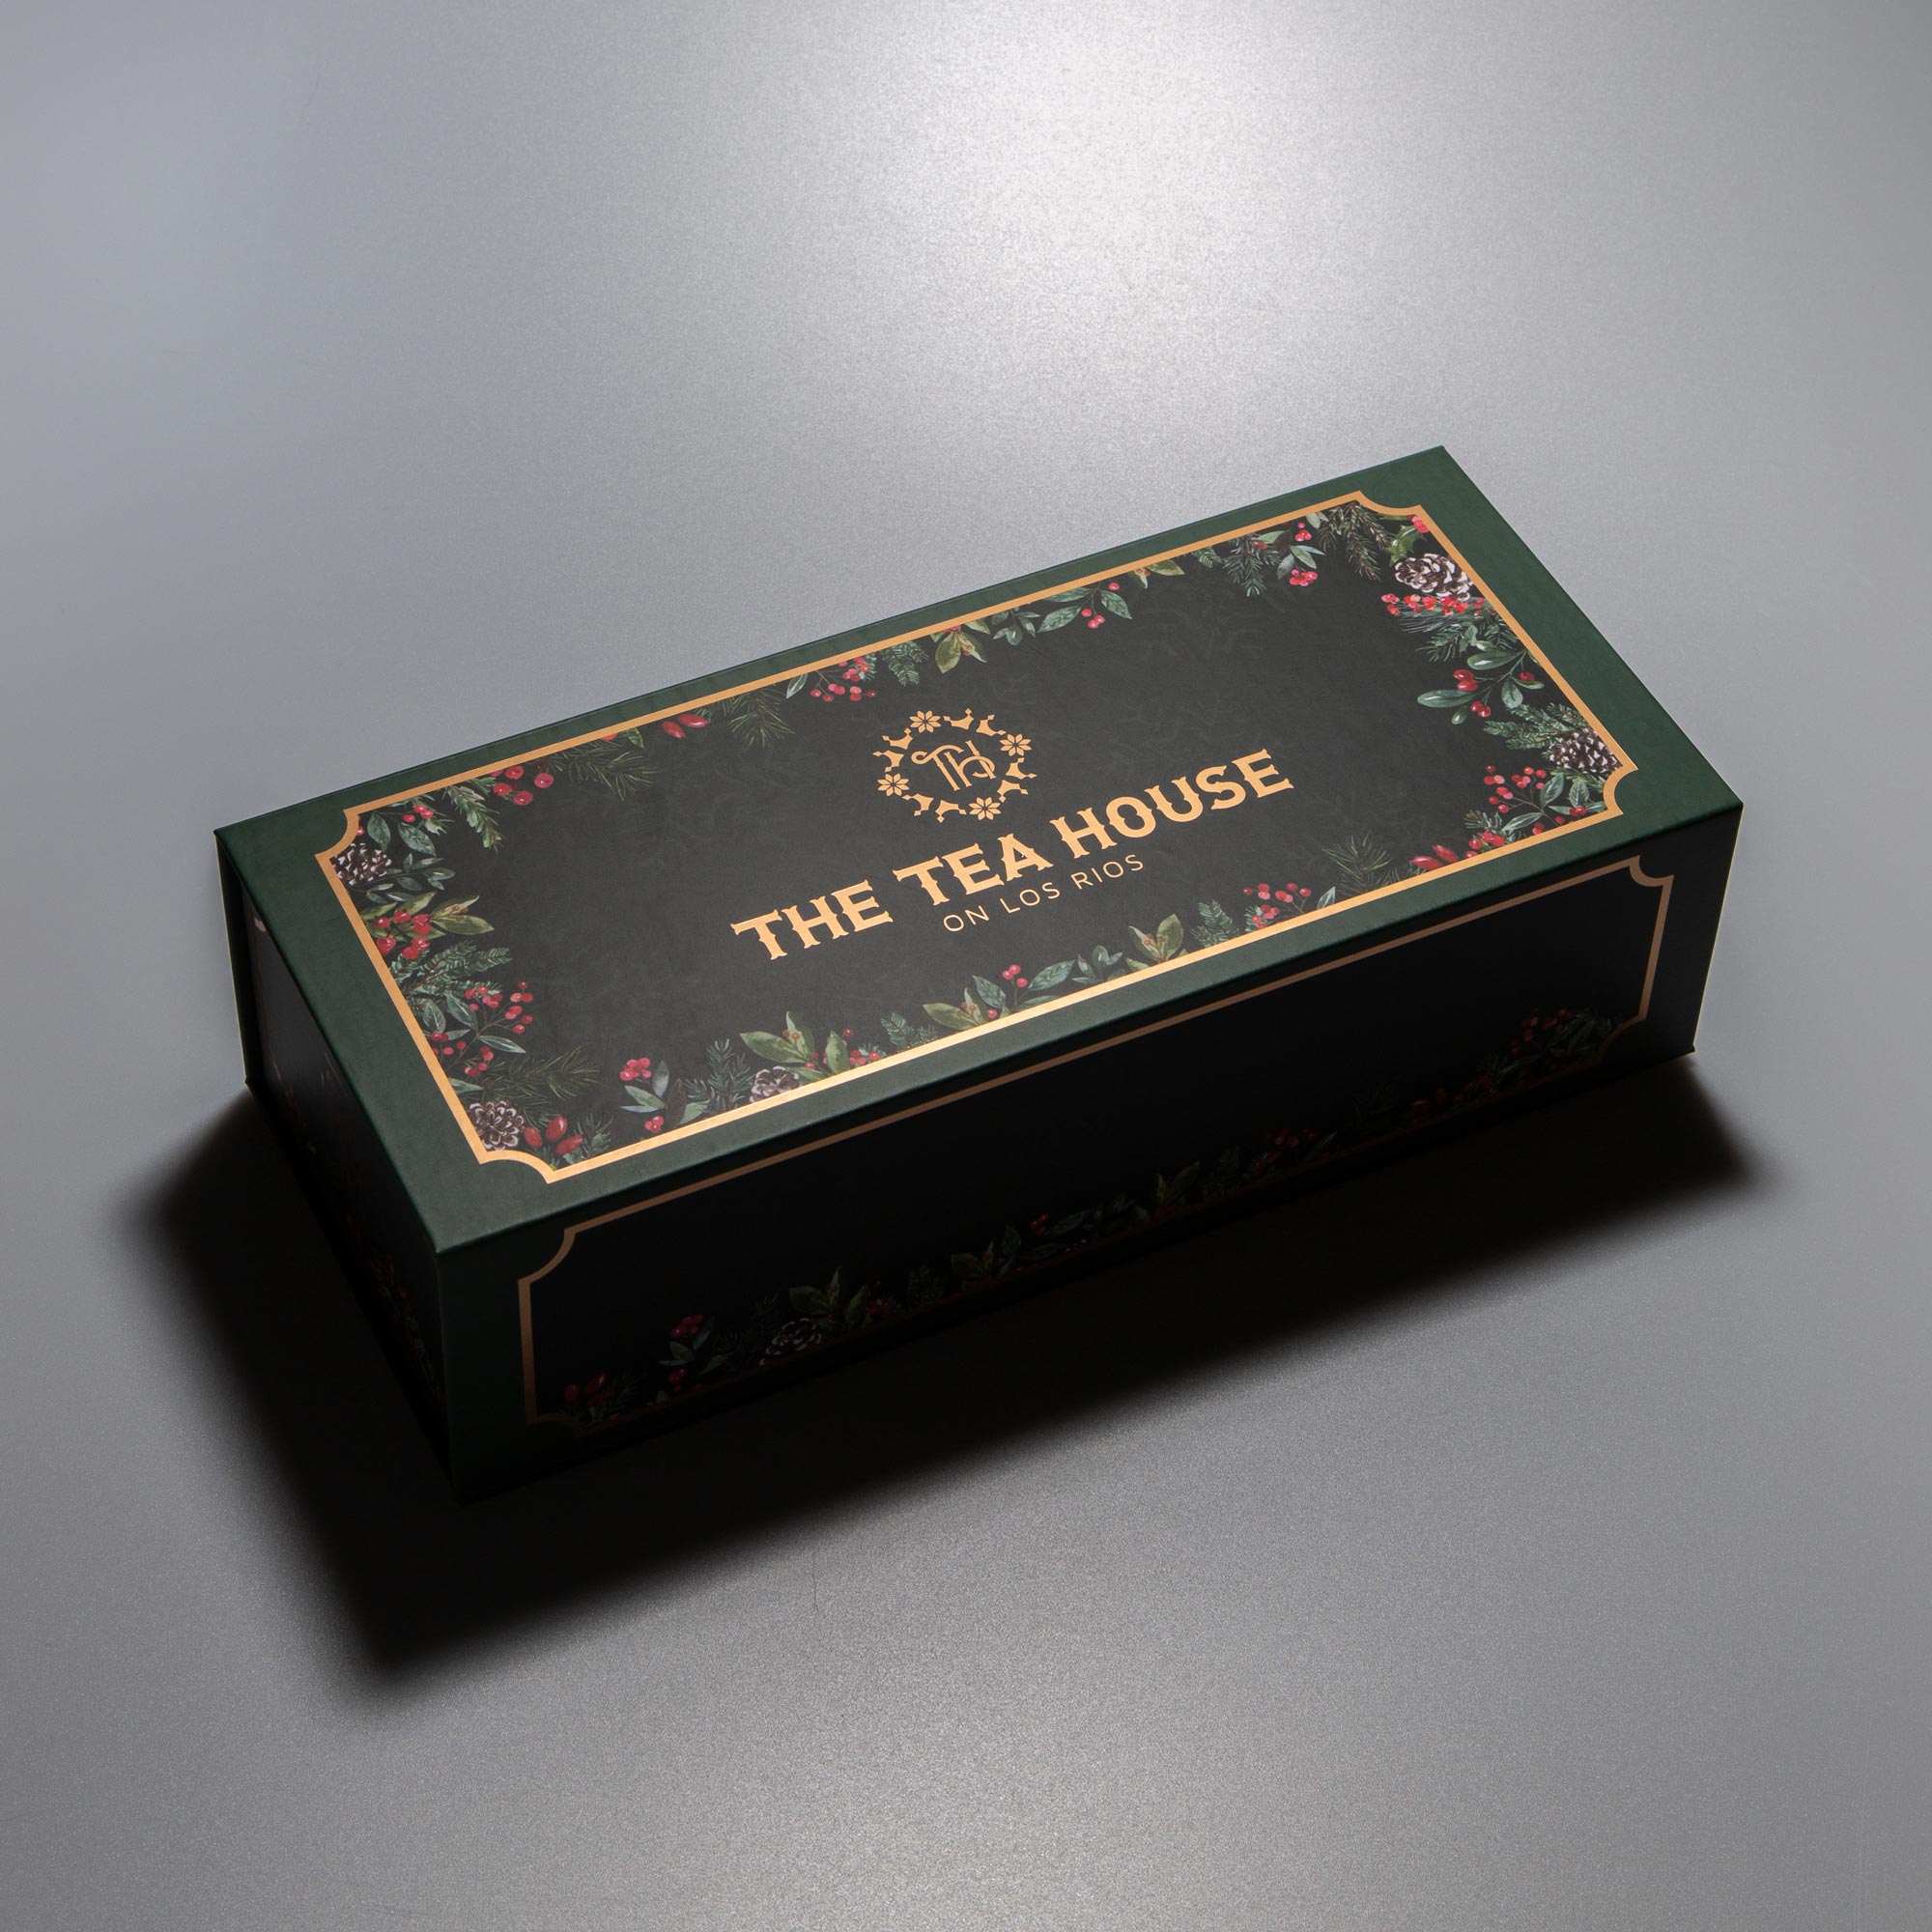 The Tea House on Los Rios - Holiday Gift Box! Limited Edition Festive Gift